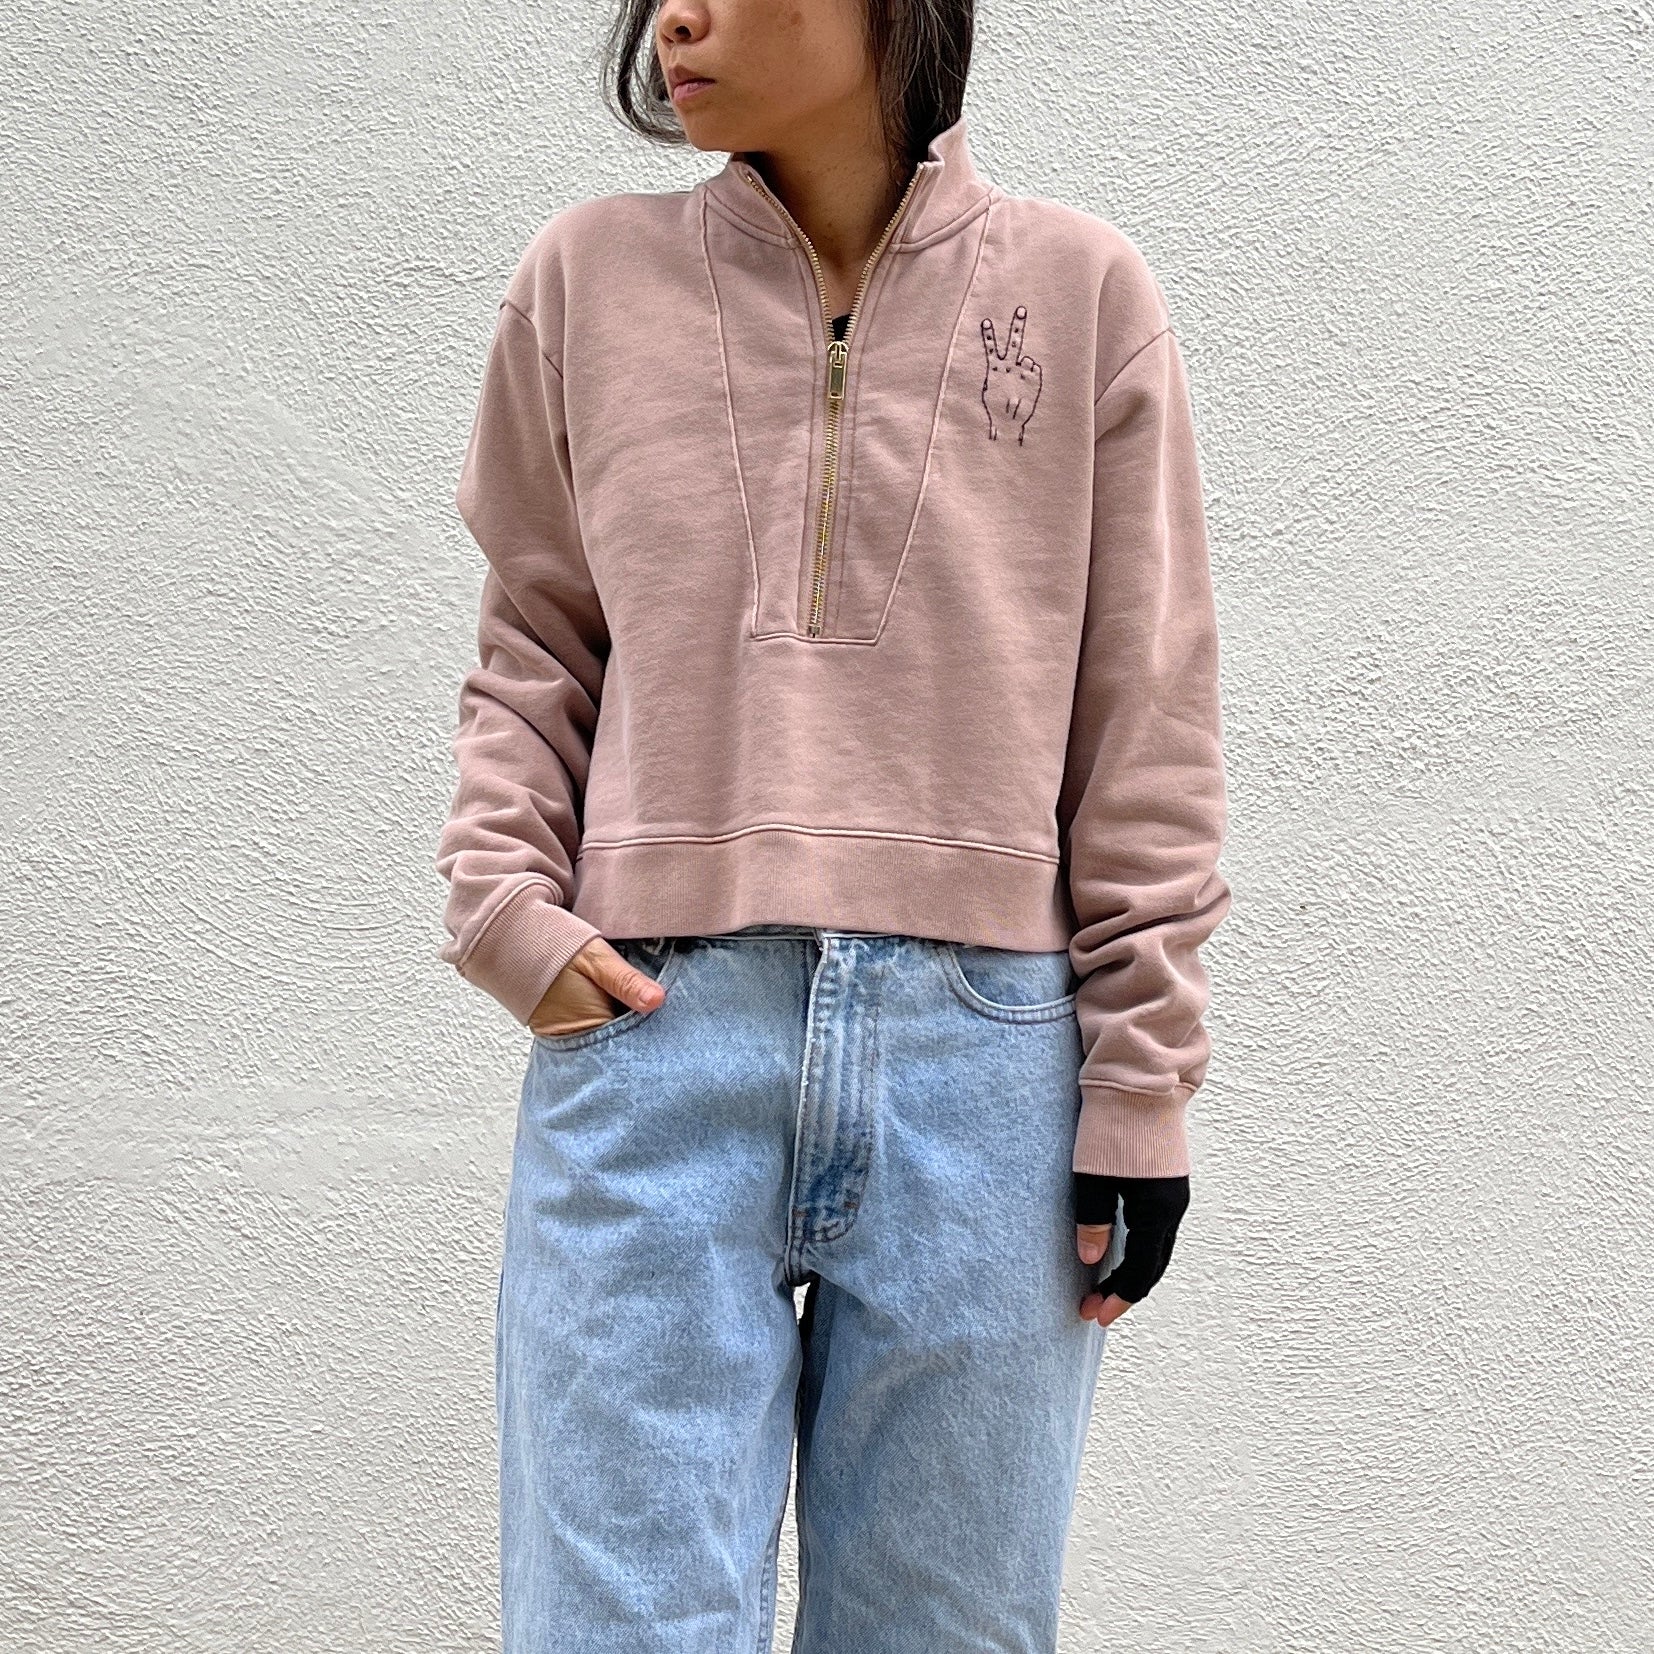 Peace' Finger Embroidery Sweatshirt - Overdyed Tan